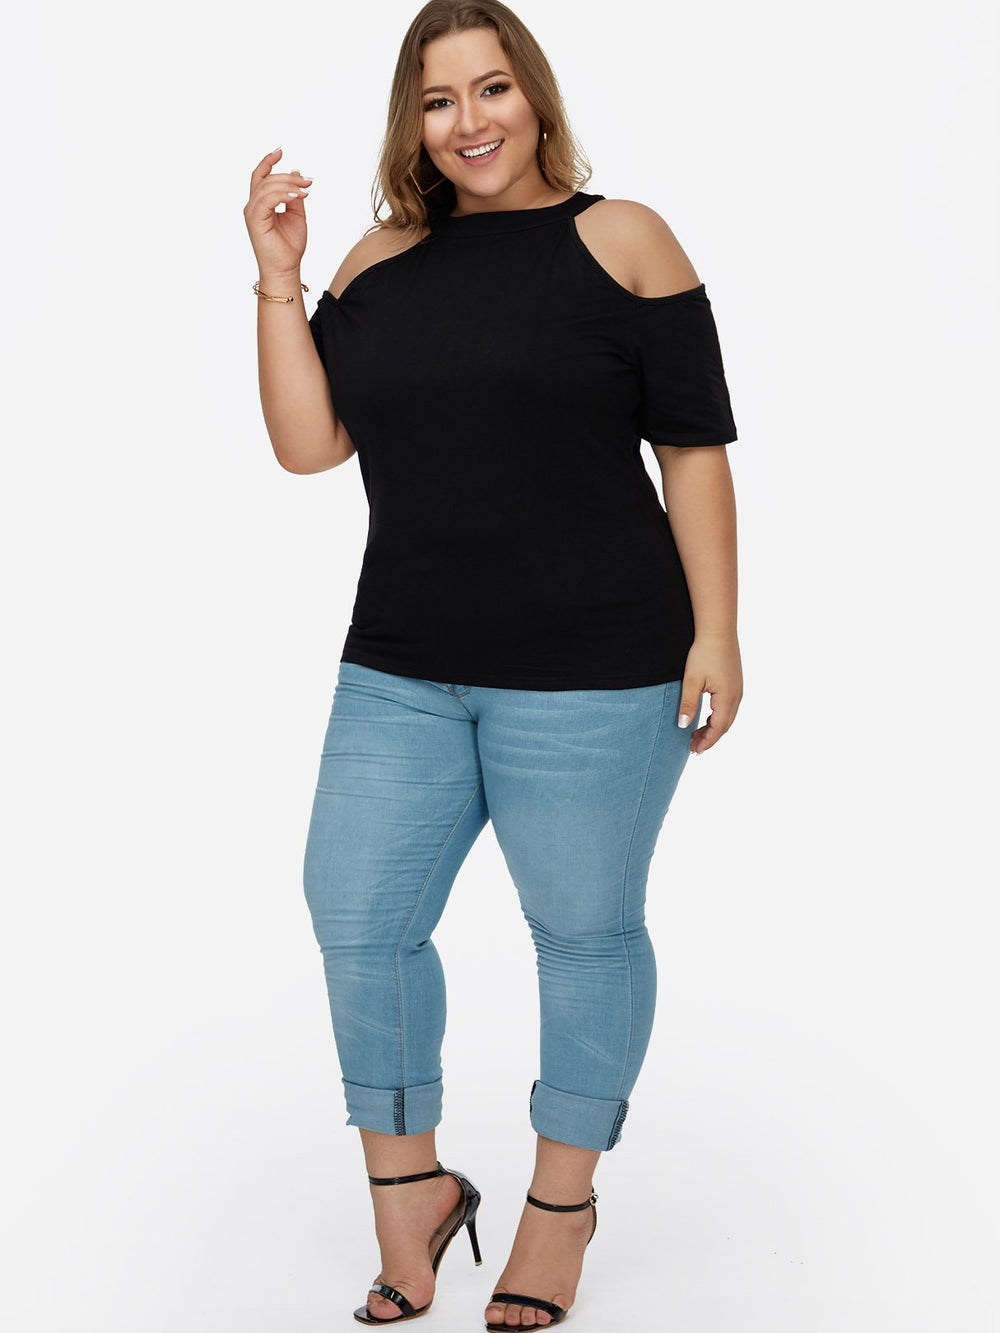 Womens Short Sleeve Plus Size Tops